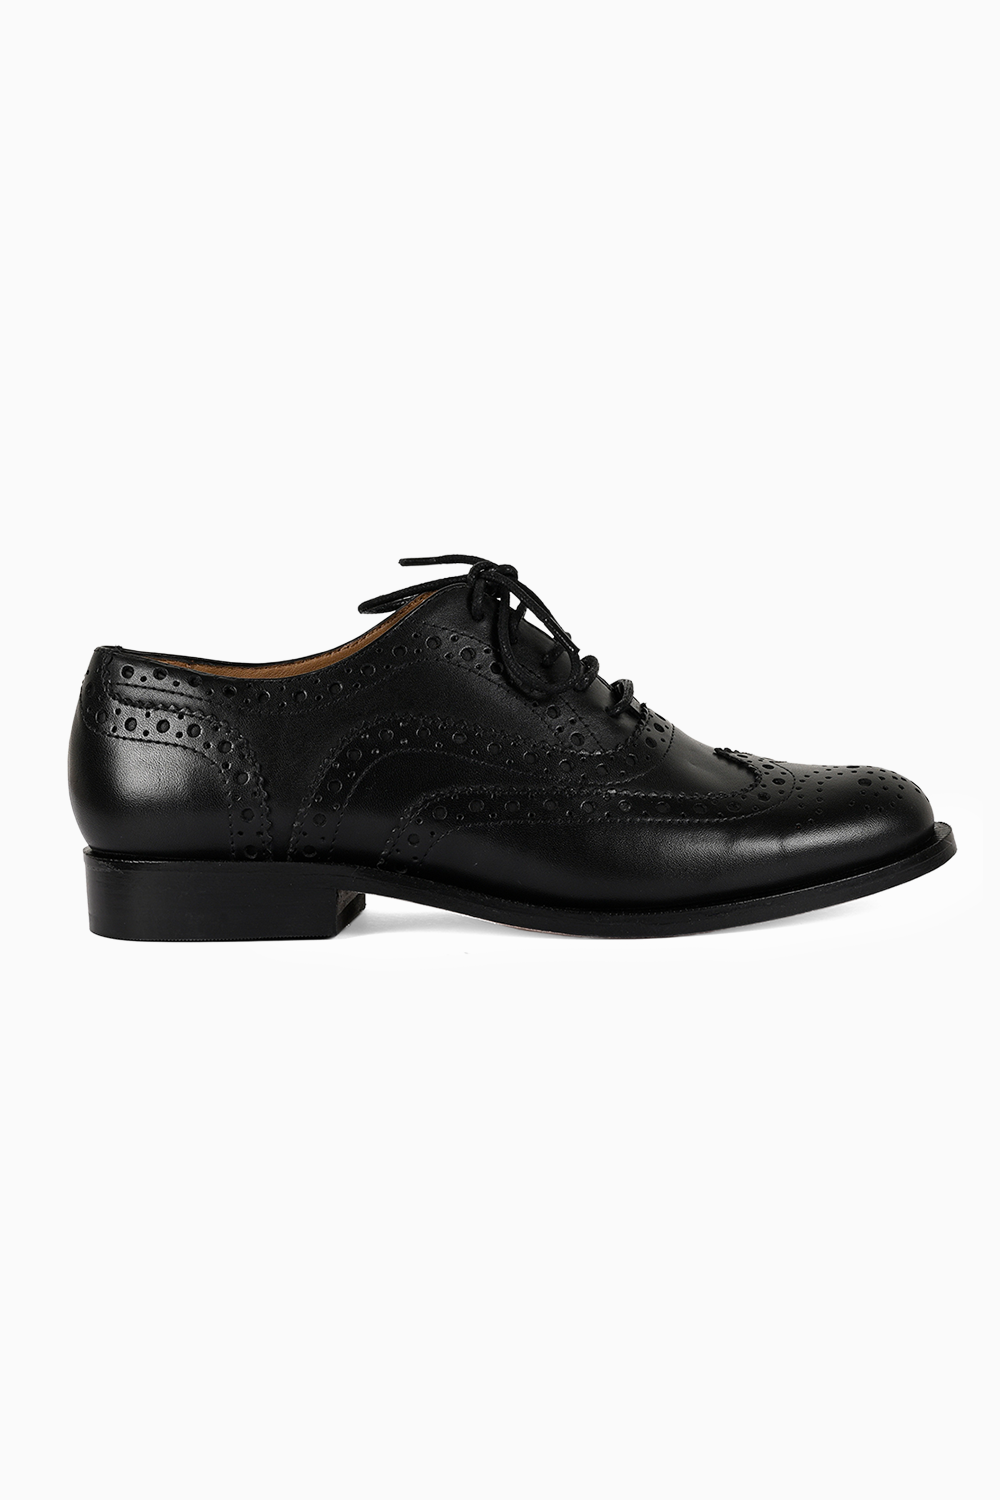 Piper Black Lace up Shoes